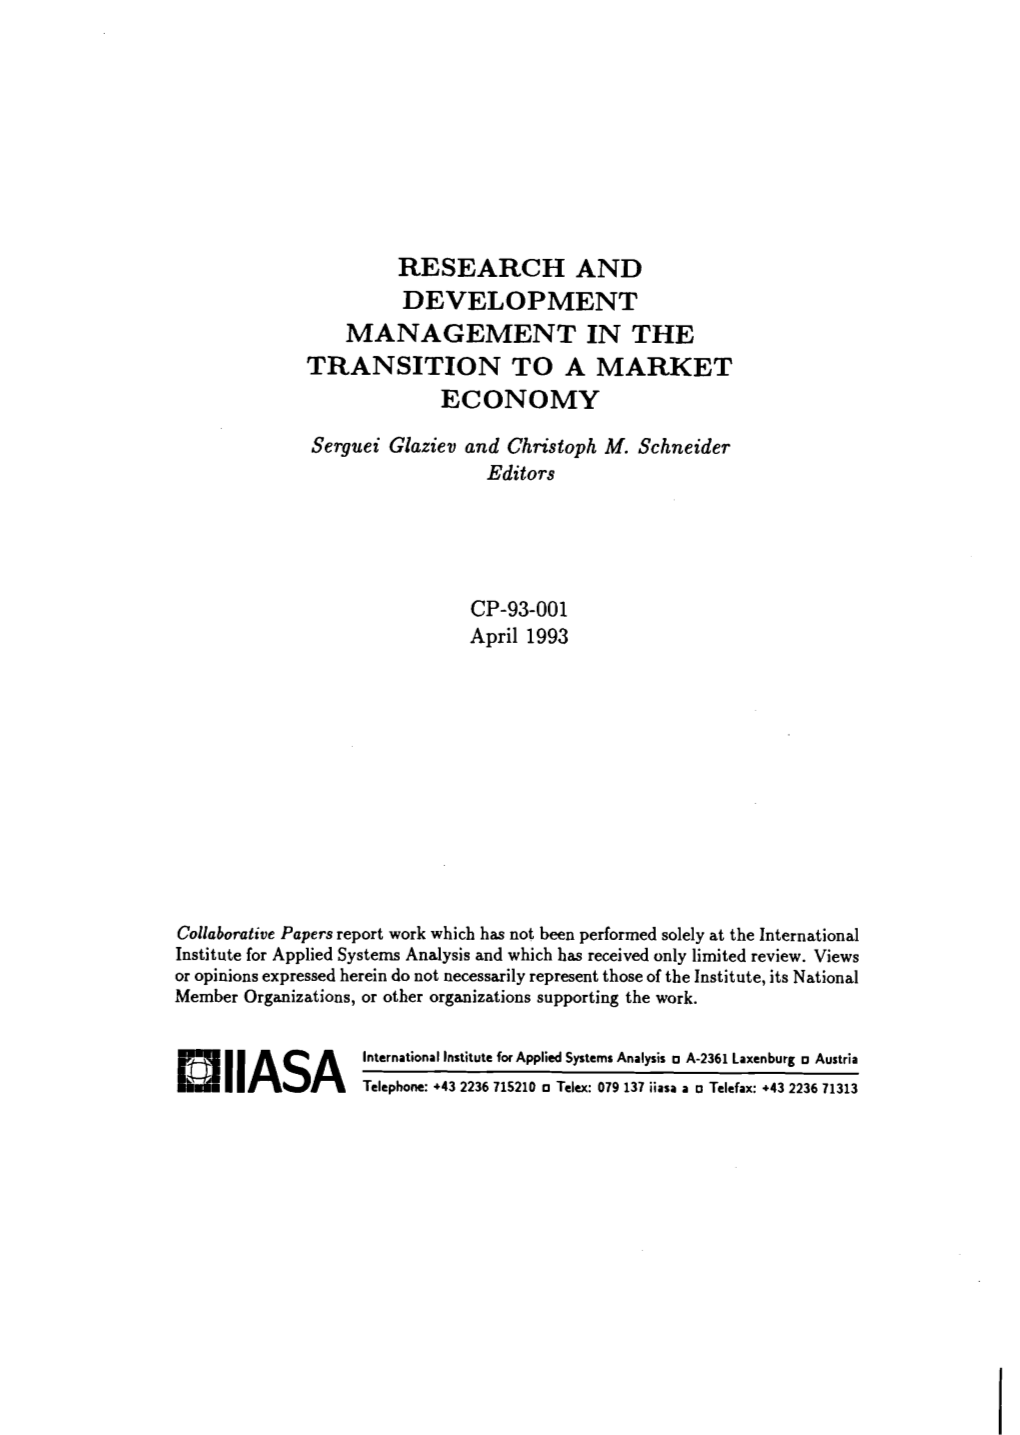 RESEARCH and DEVELOPMENT MANAGEMENT in the TRANSITION to a MARKET ECONOMY Serguei Glaziev and Christoph M